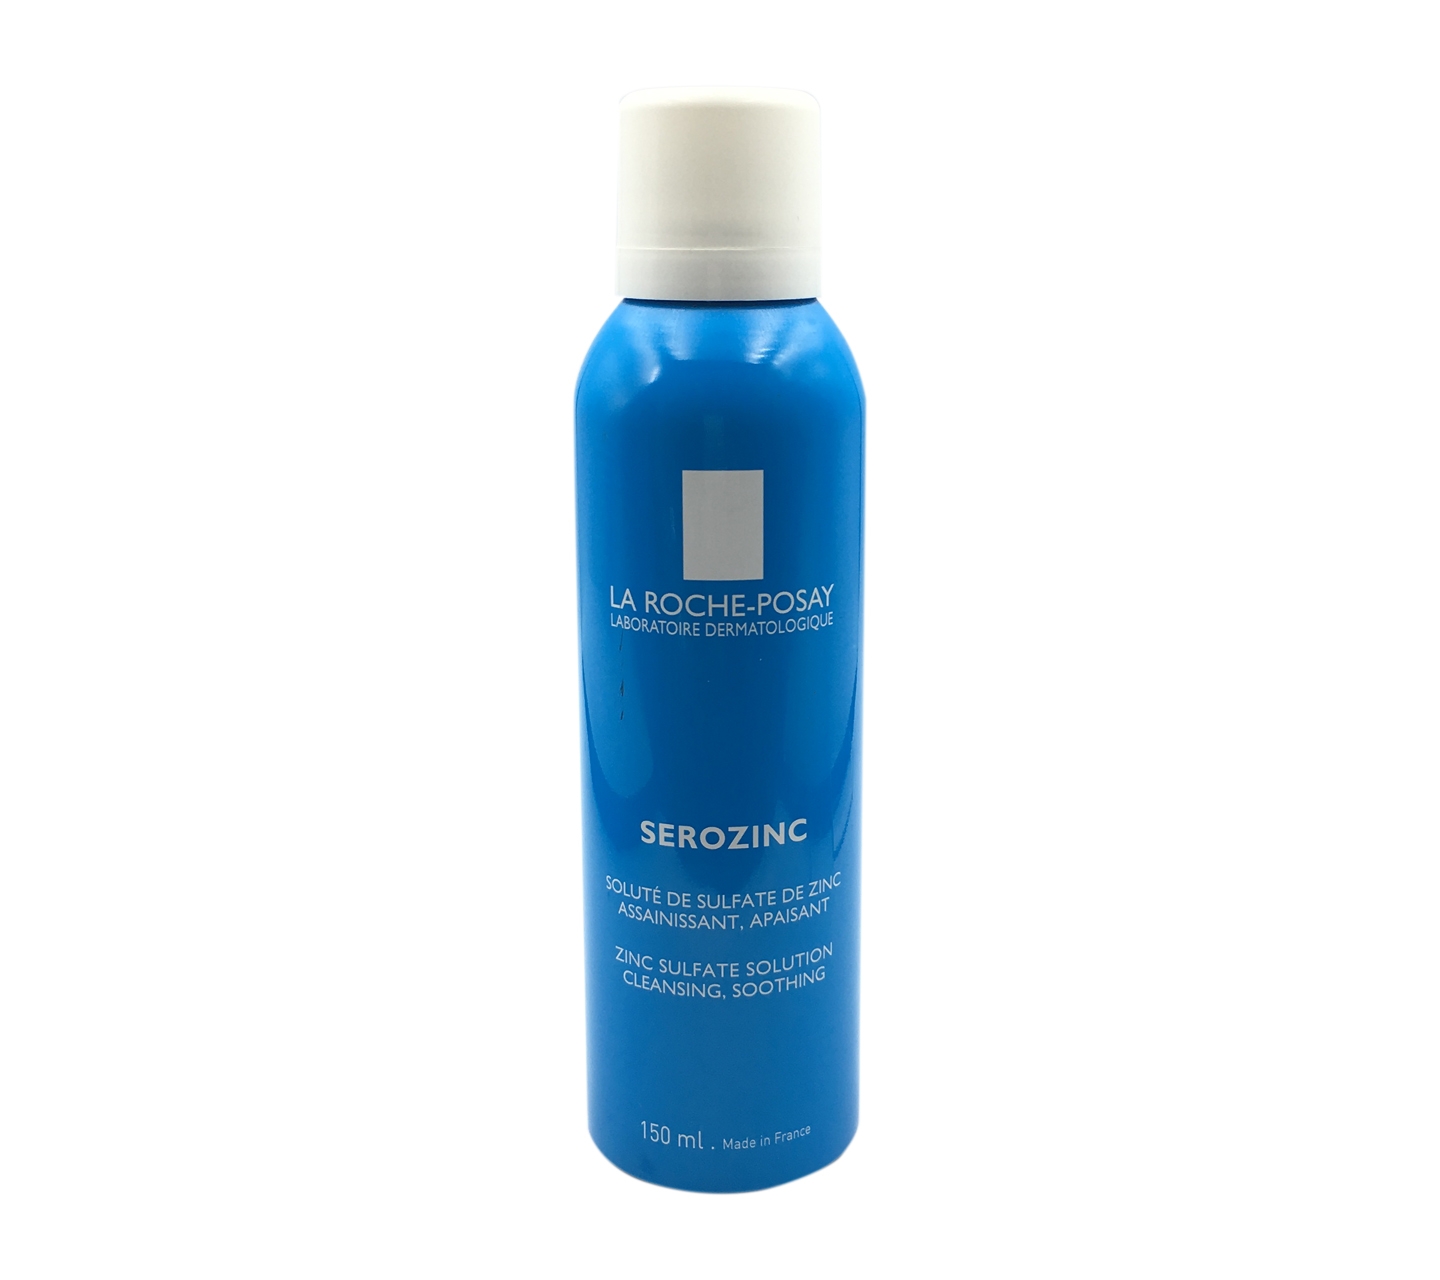 La Roche Posay Serozinc Zinc Sulfate Solution Cleaning , Soothing Faces